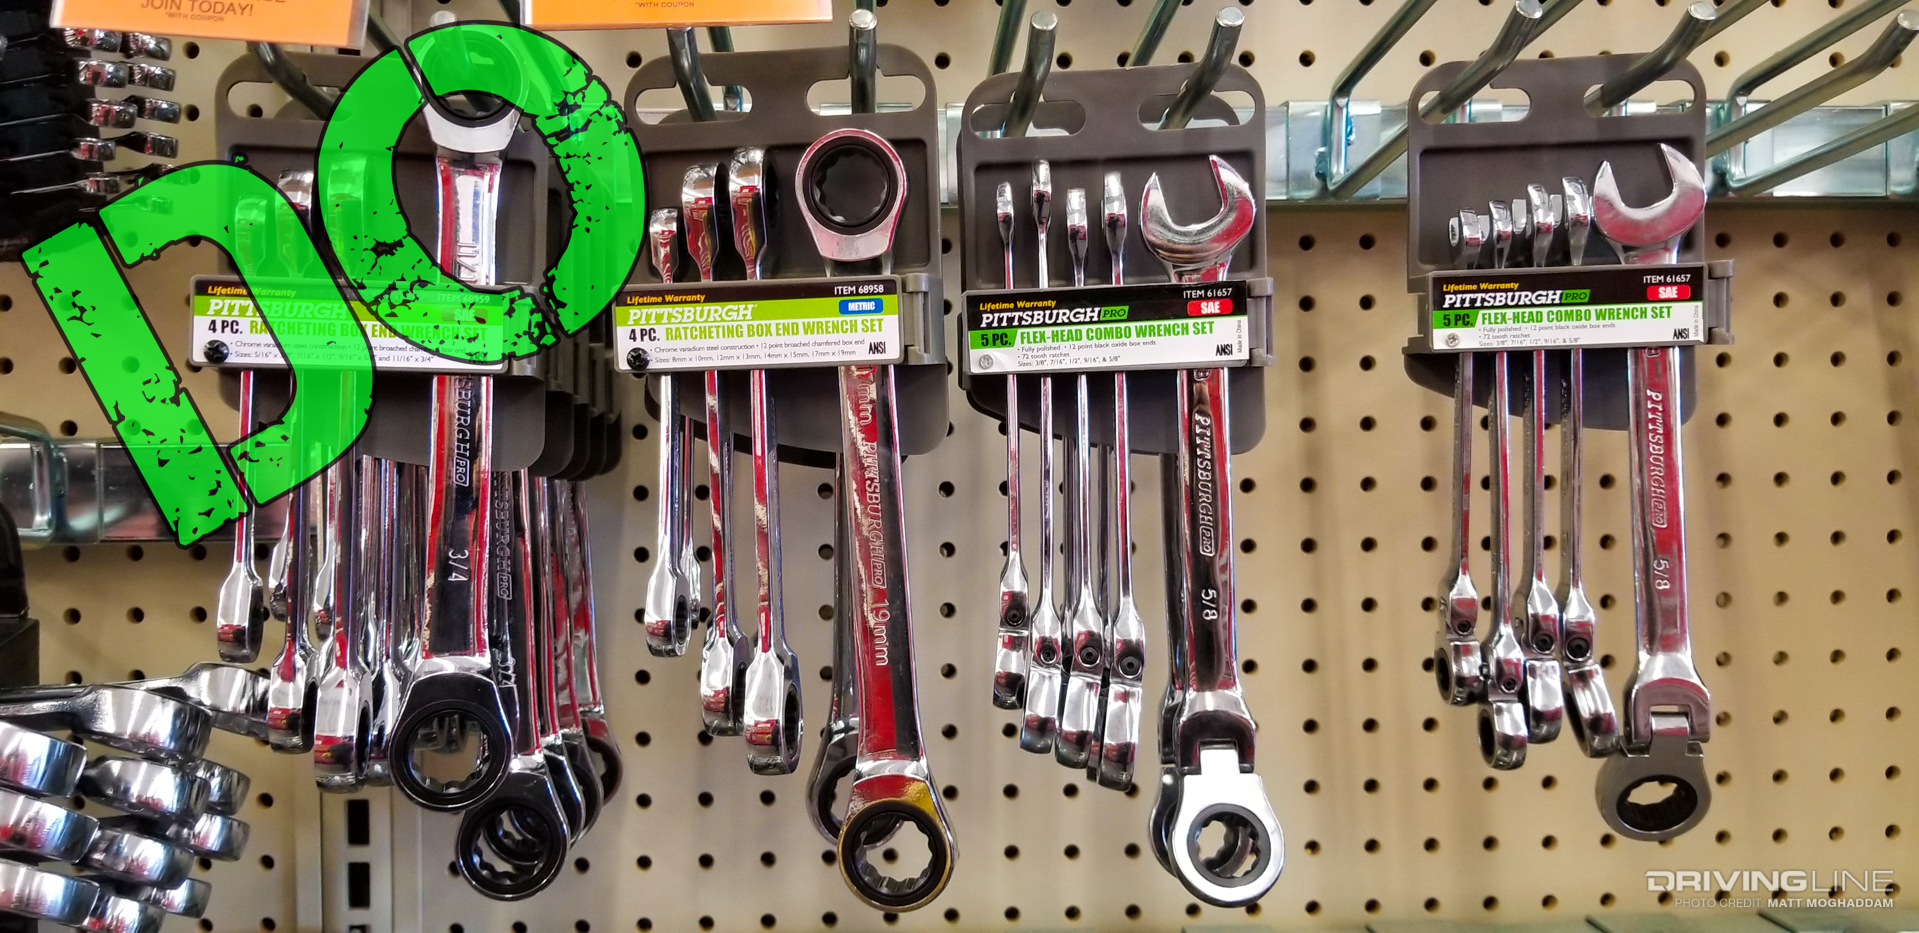 25 Do’s and Don’ts of Harbor Freight Tools | DrivingLine